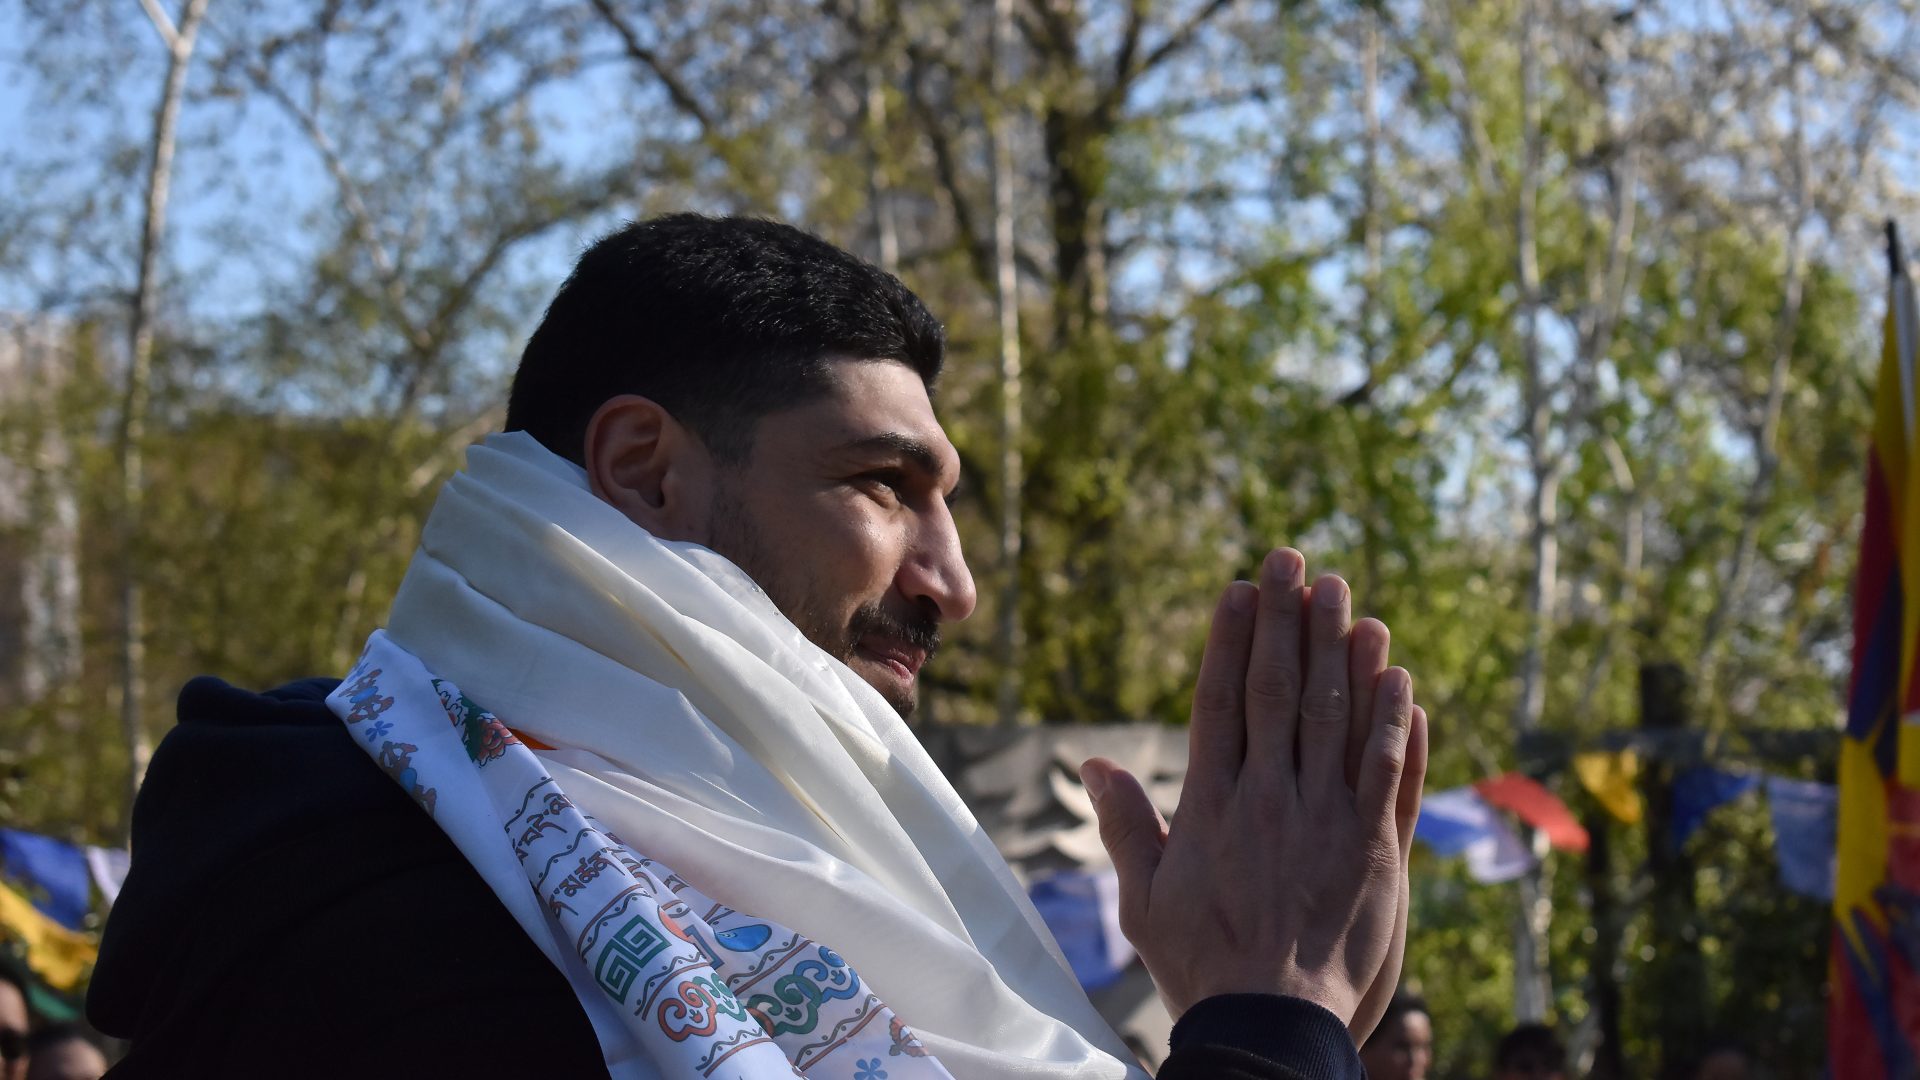 Enes Kanter Freedom puts his hands together in thanks towards the Tibetan Community for their warm welcome.